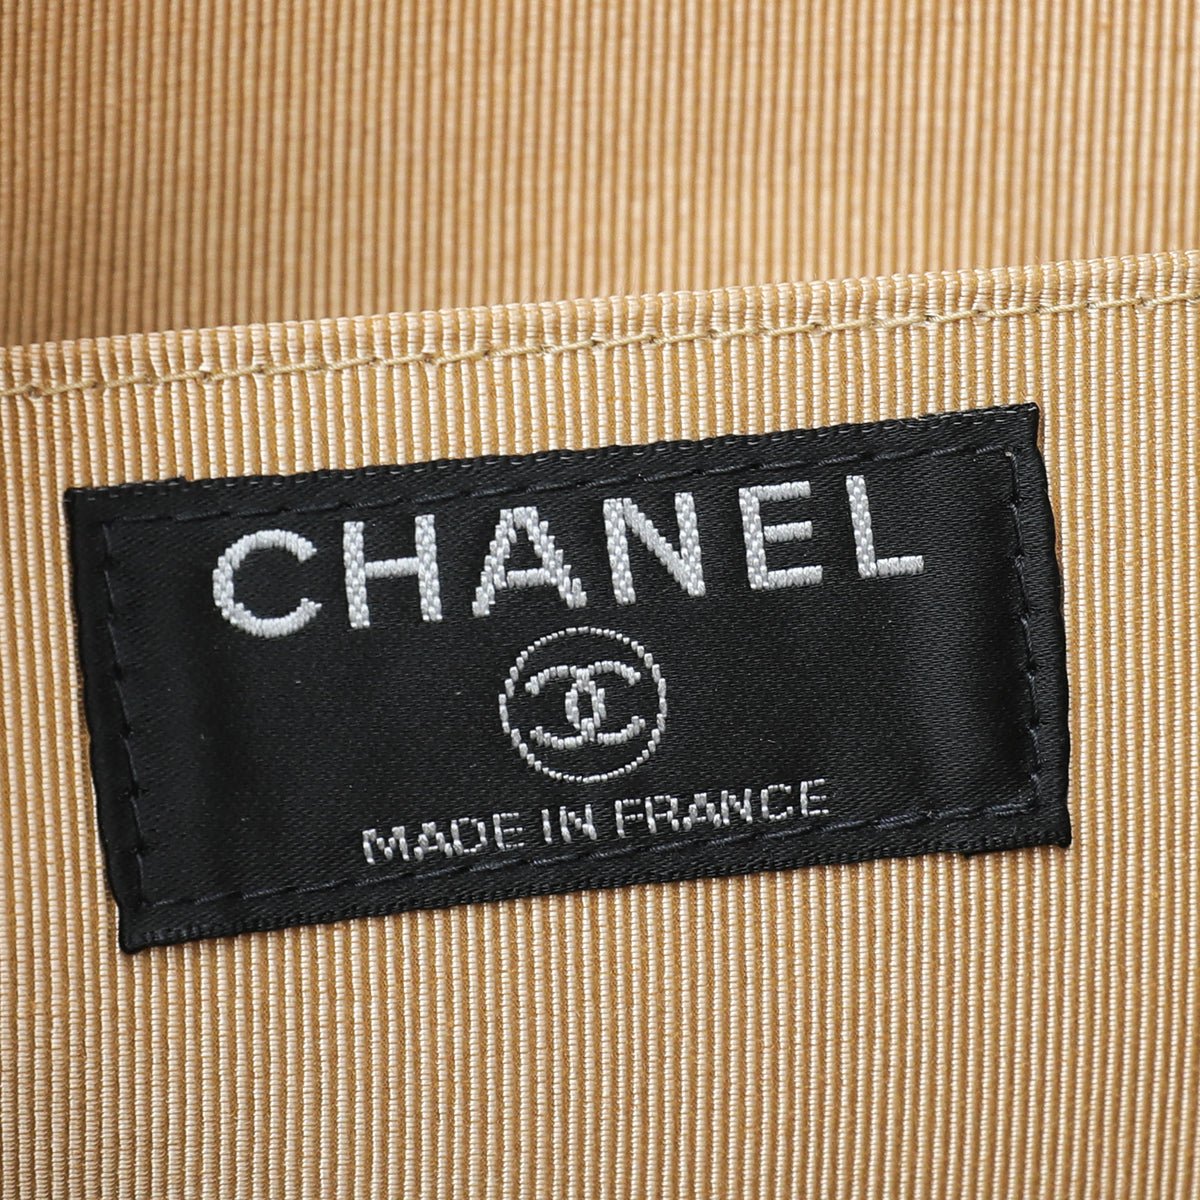 Chanel - Chanel Bicolor Tweed Lame Mademoiselle Chain Flap Bag | The Closet